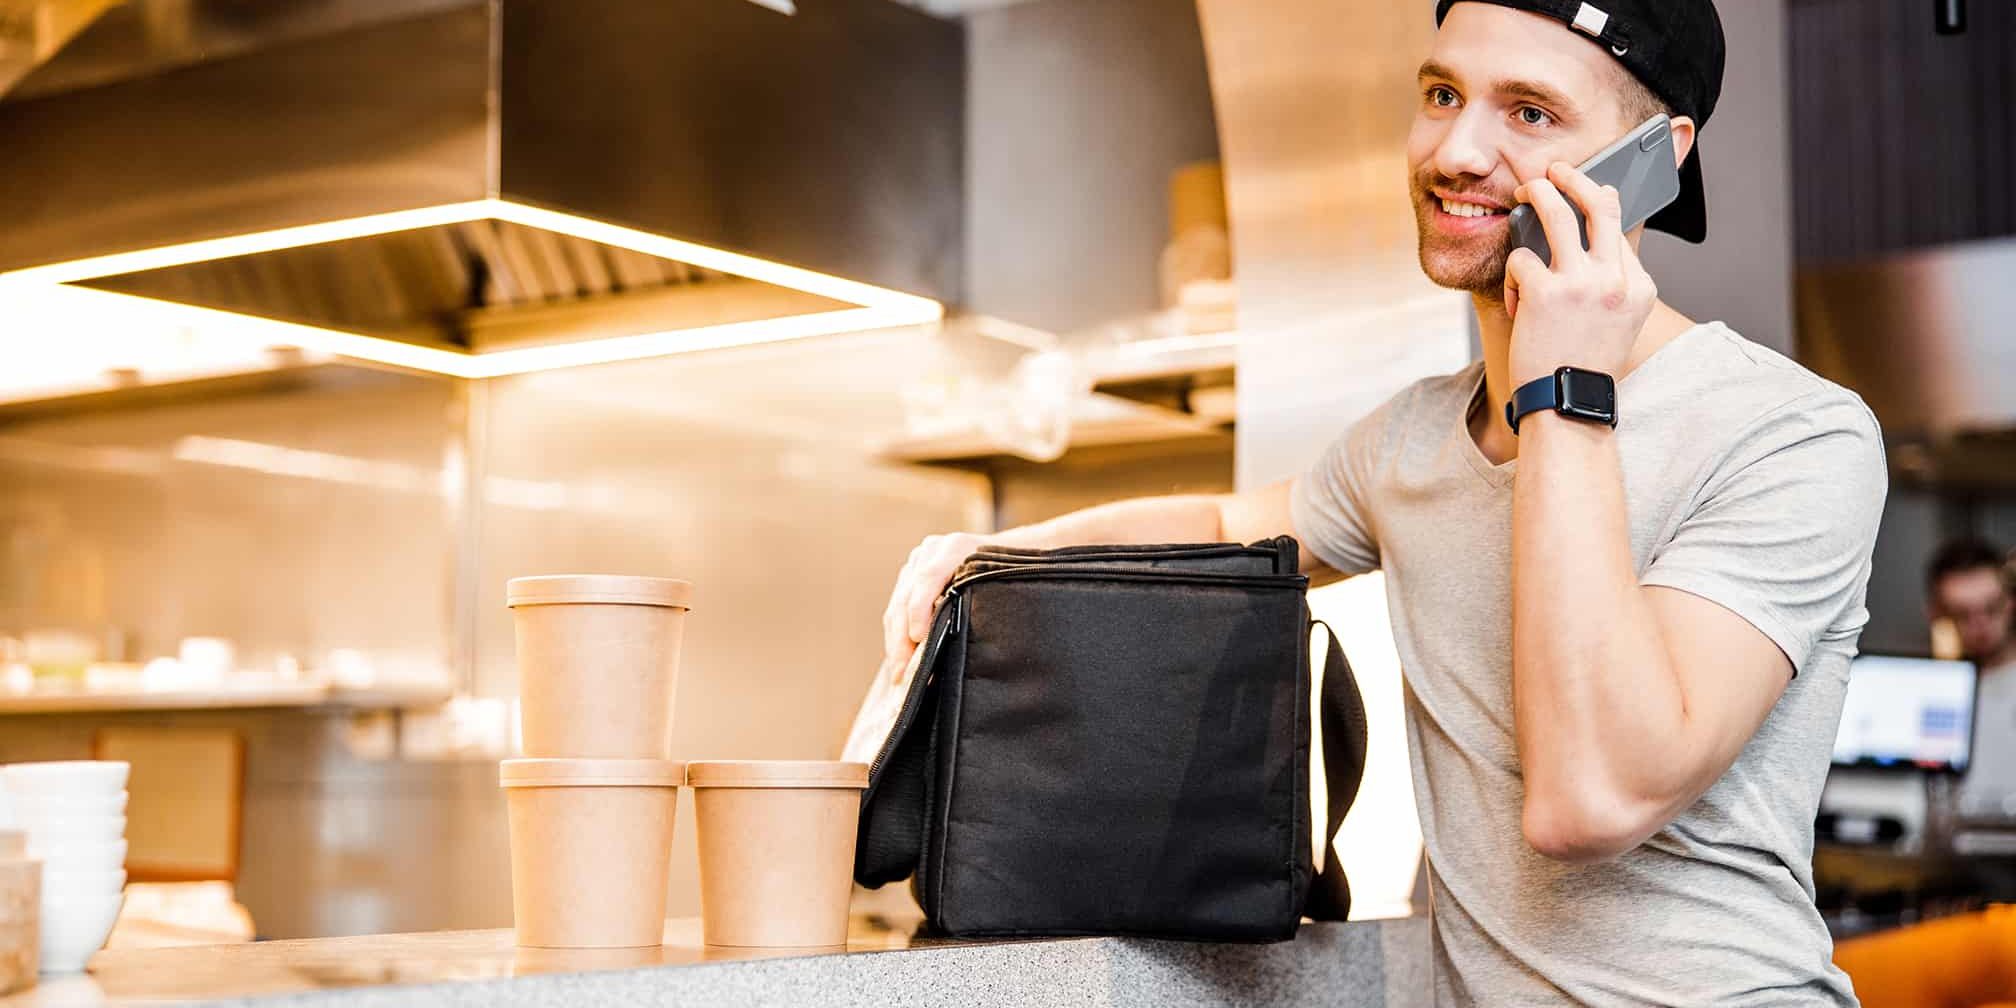 Handsome guy carrying the bag with take away food and beverages stock photo